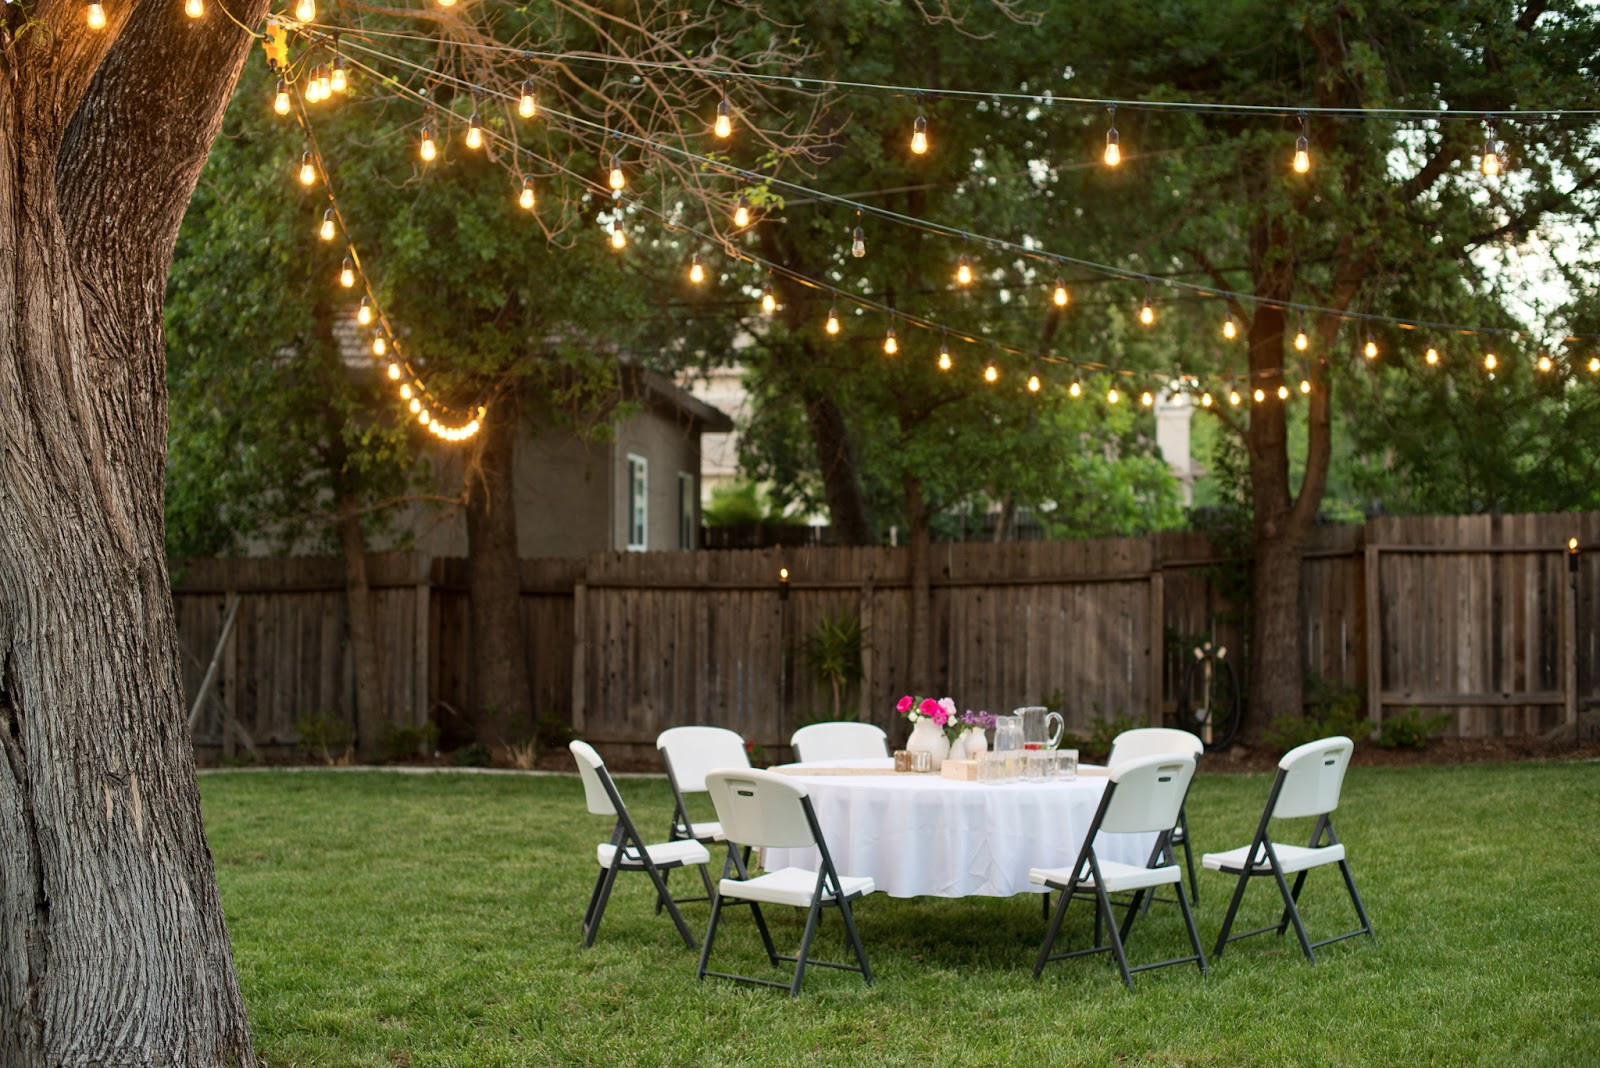 Lighting Ideas For Backyard Party
 Domestic Fashionista Backyard Anniversary Dinner Party